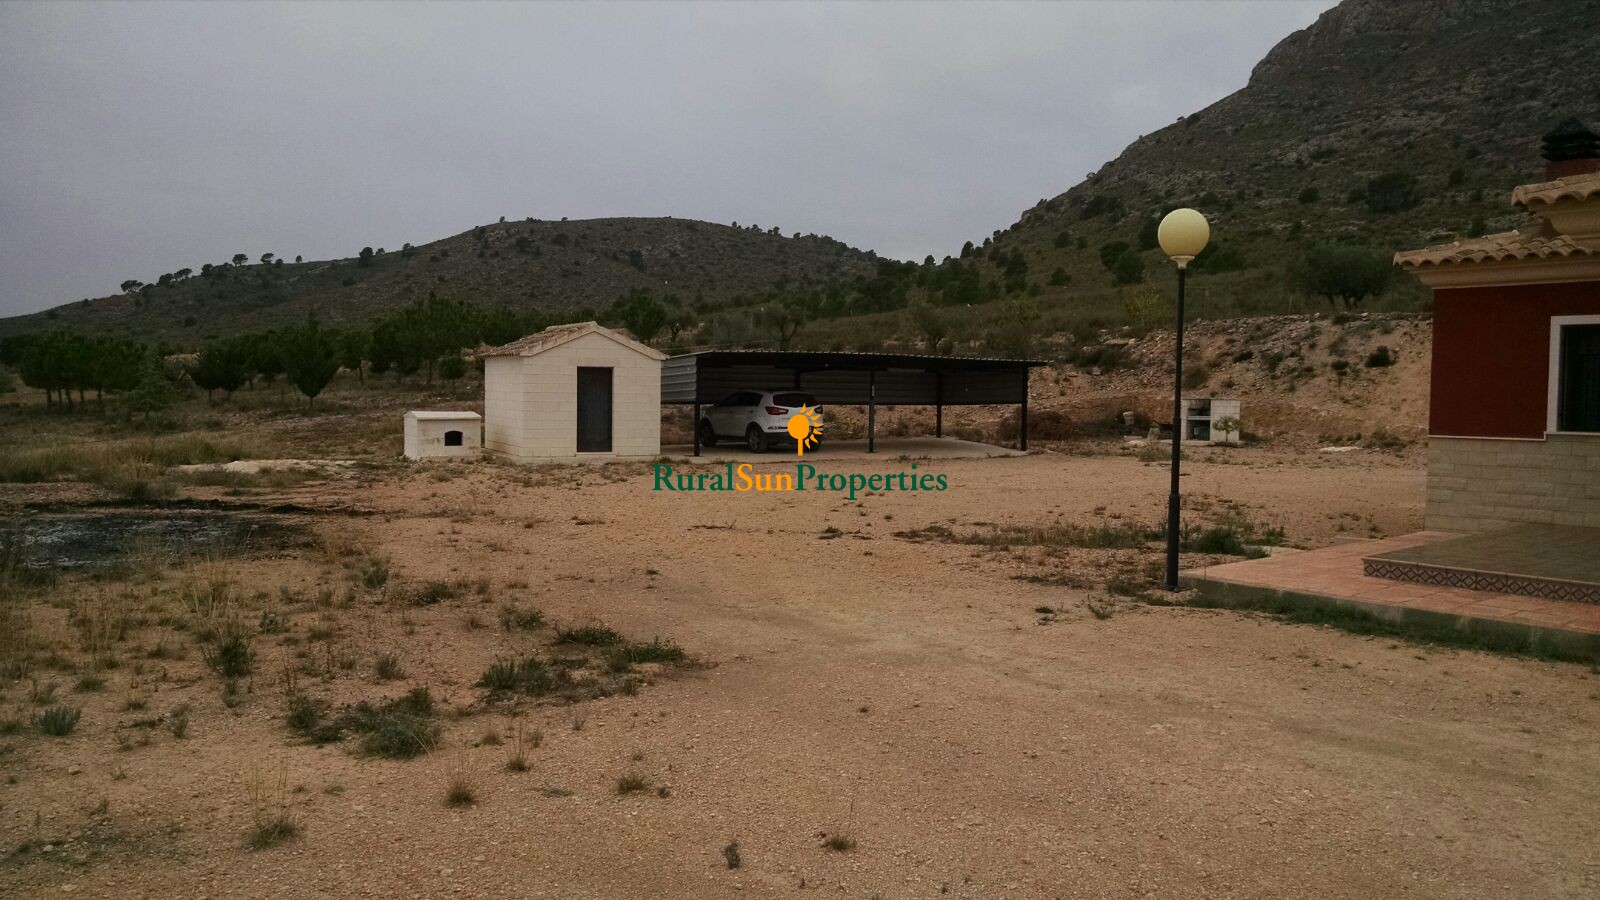 Villa for sale in Yecla on a plot of 7,500sqm